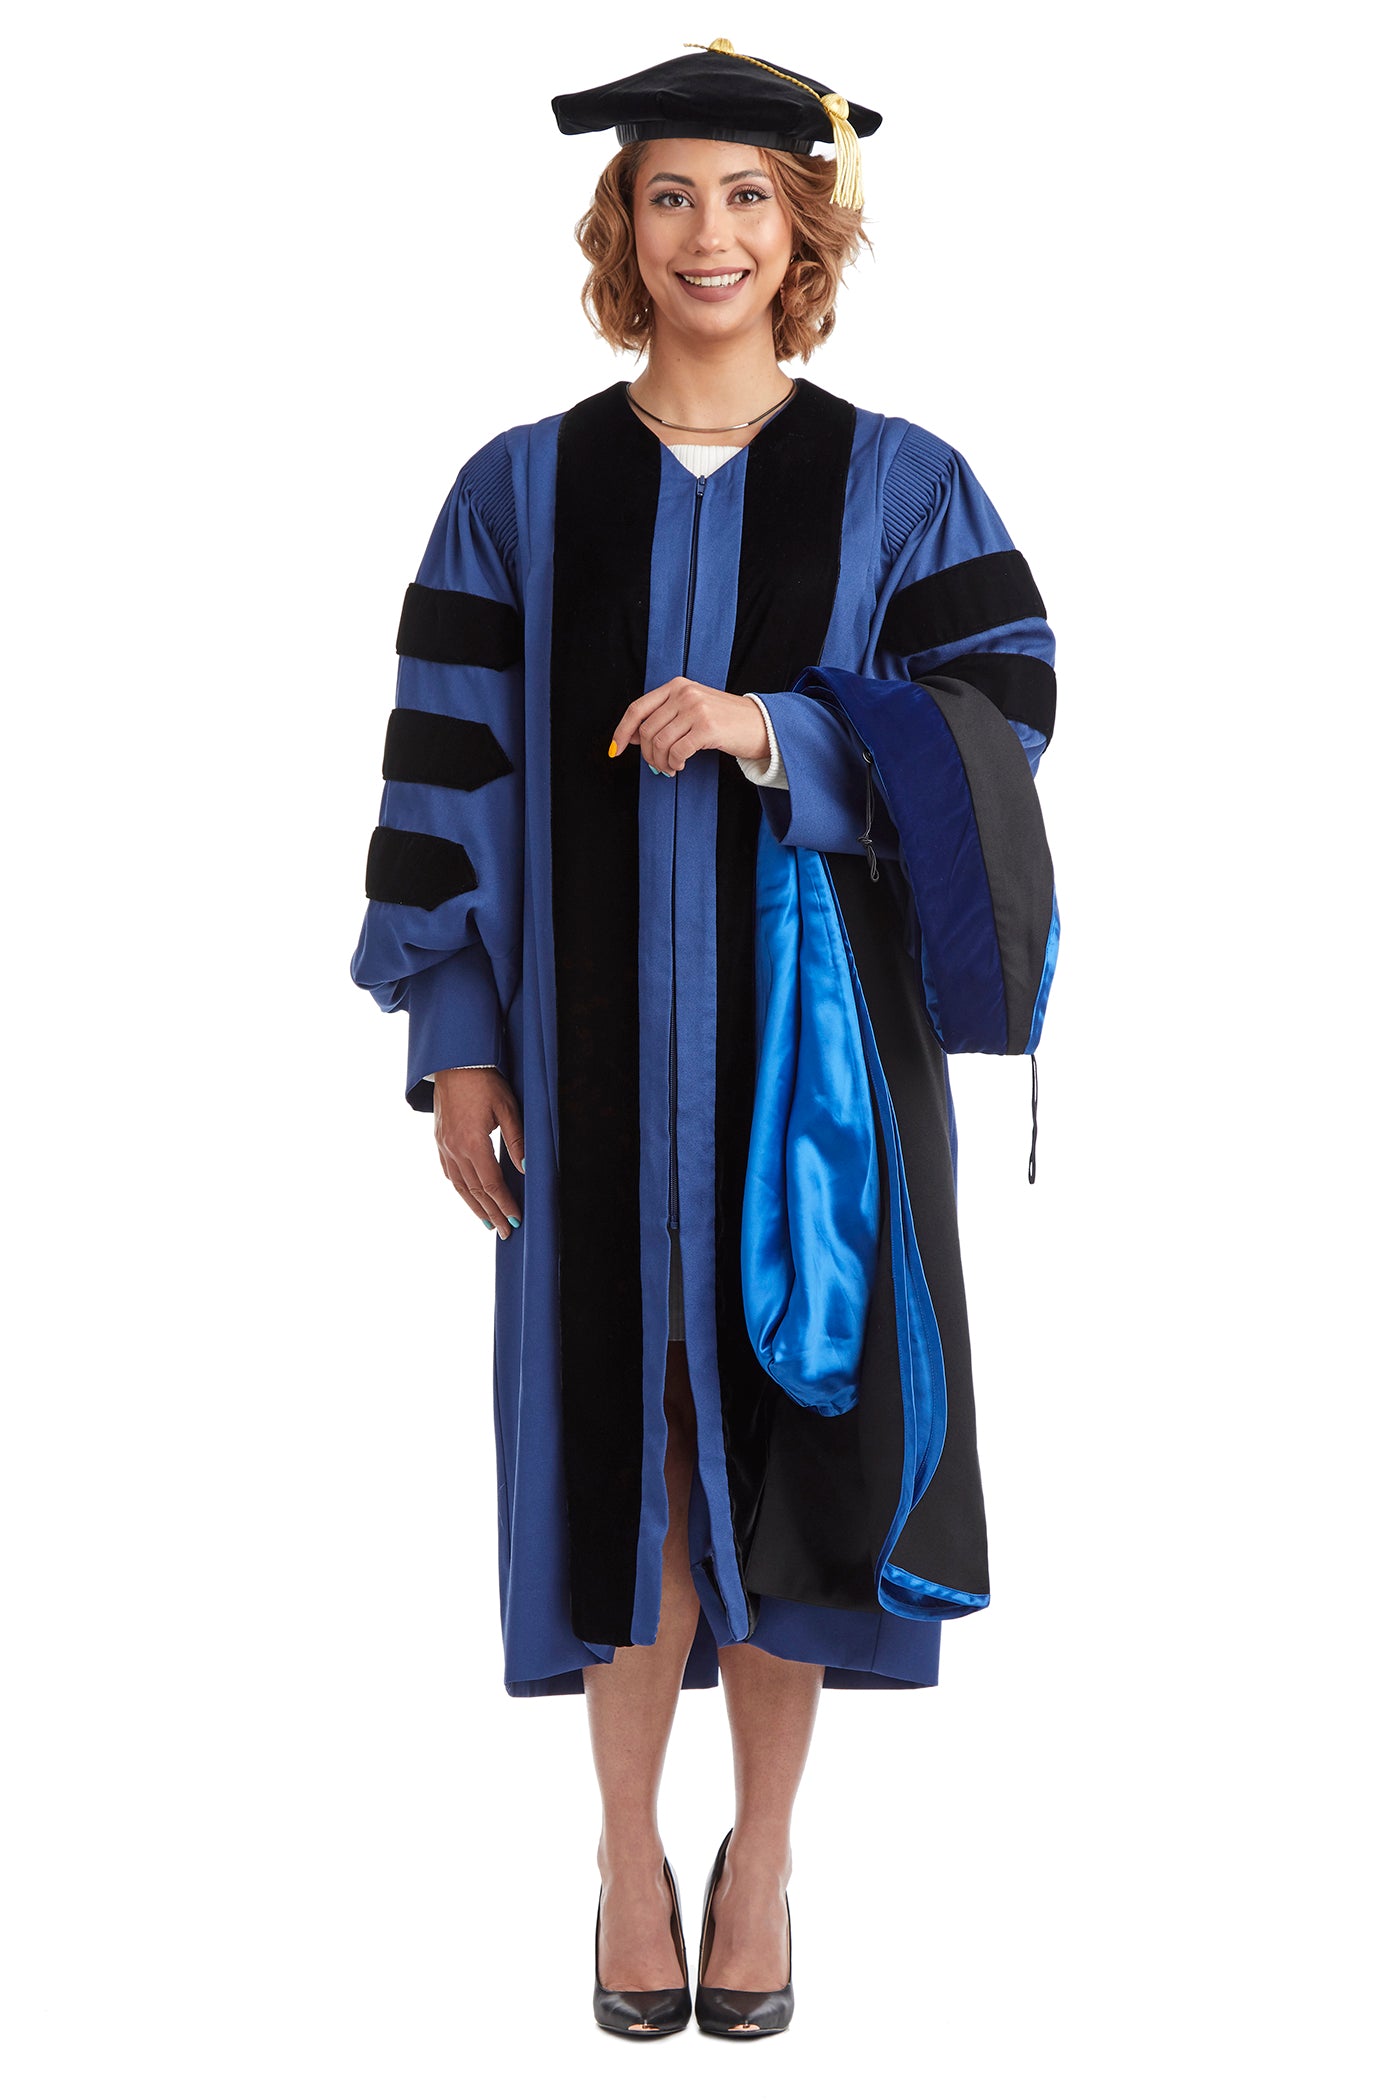 yale phd cap and gown